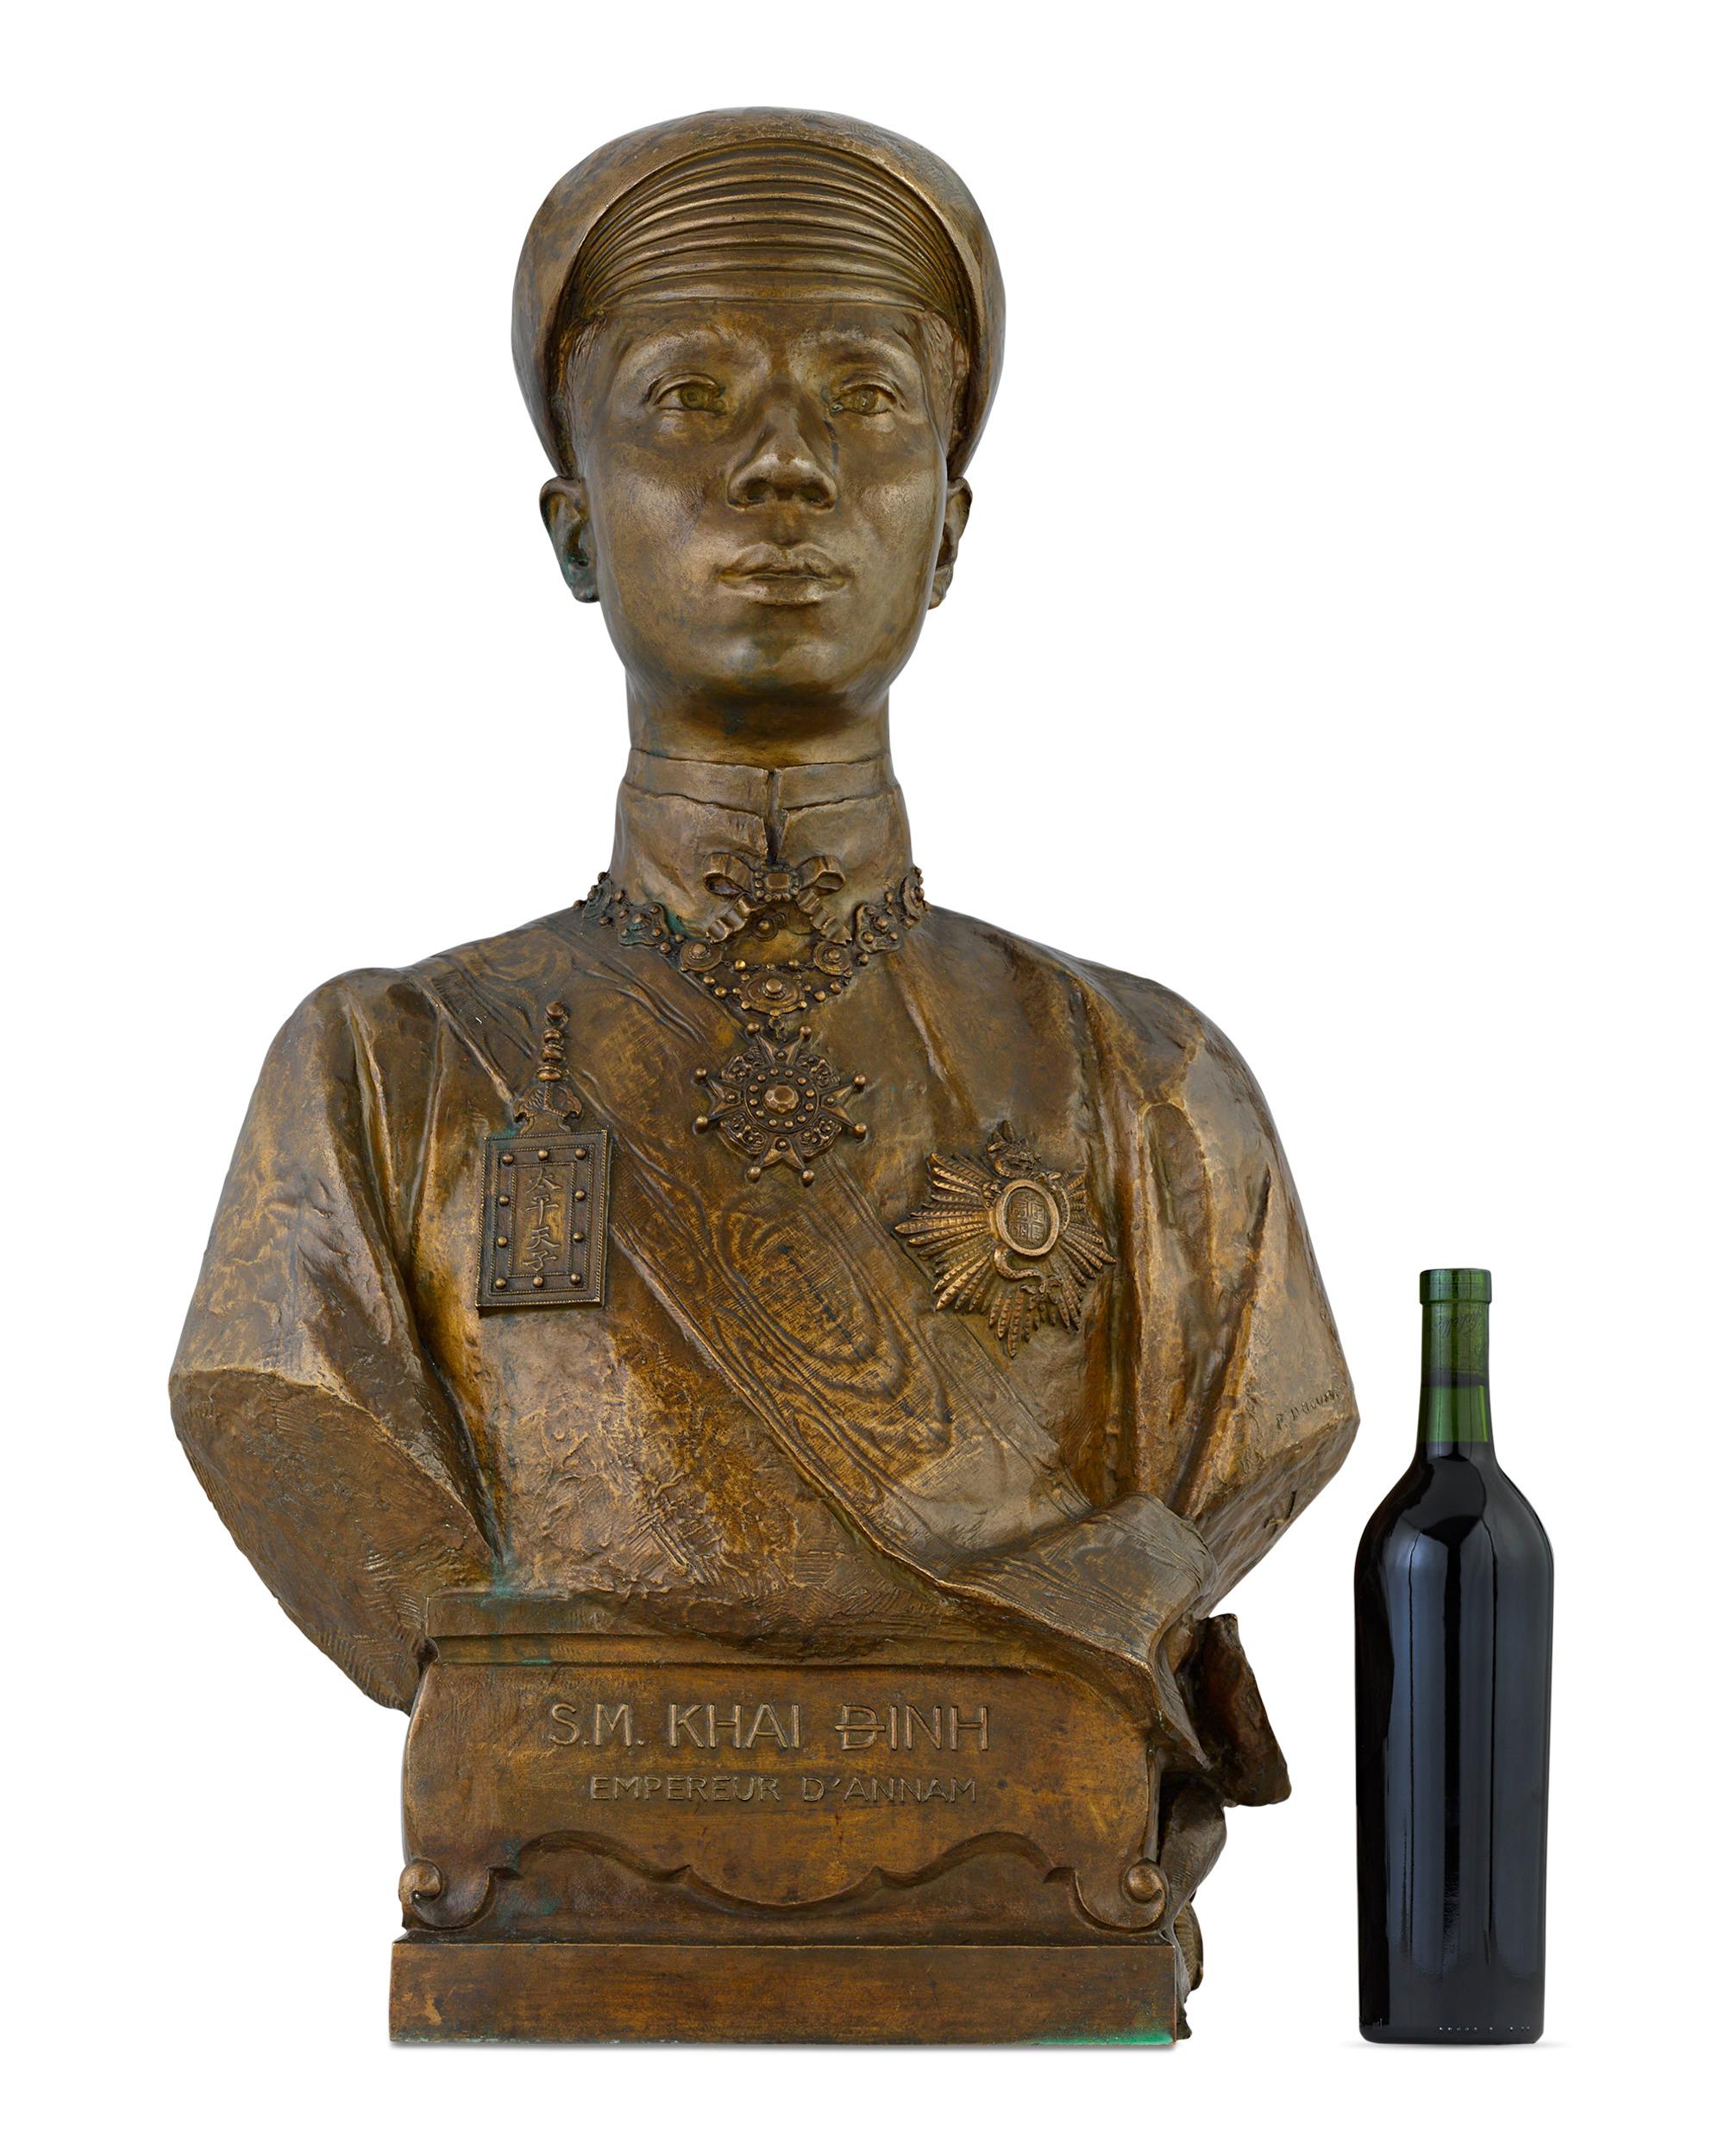 Magnificently detailed, this imperial bronze bust by the French sculptor Paul Ducuing captures the likeness of Khai Dinh, the 12th Emperor of the Nguyen Dynasty in Vietnam who reigned from 1916 to 1925. Produced by Barbedienne, this bronze is a